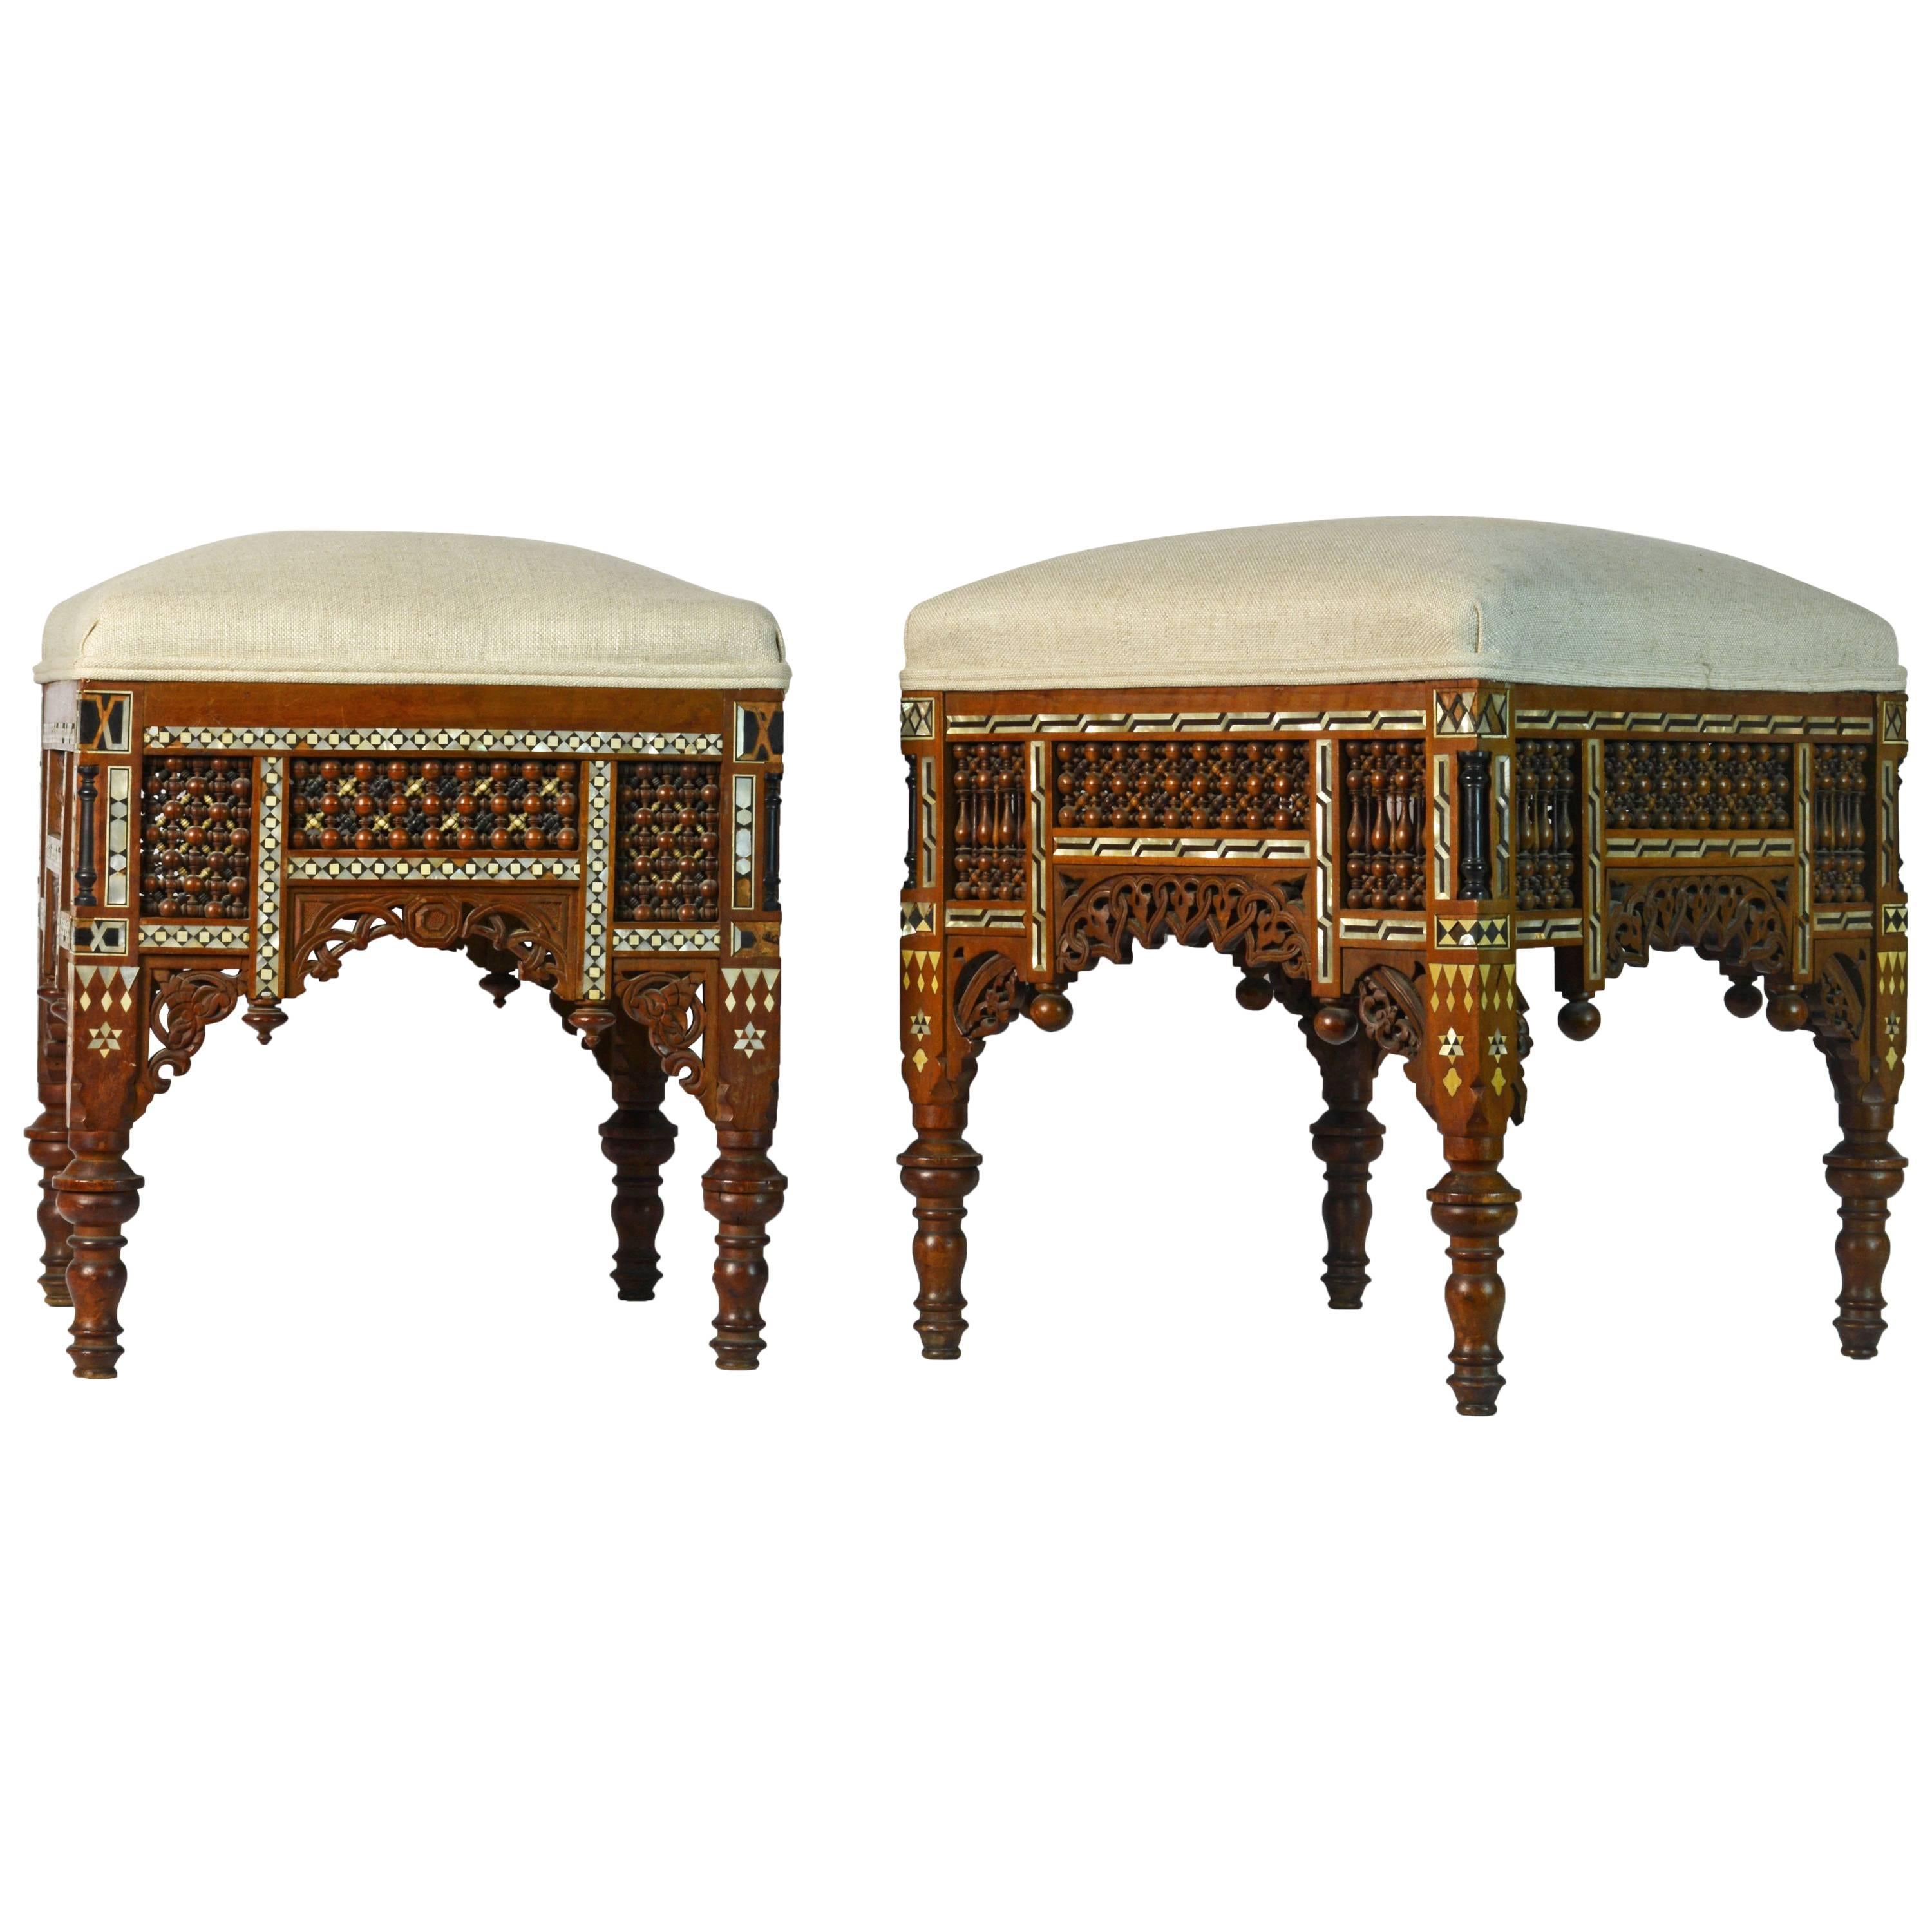 Pair of Fine 19th Century Mother-of-pearl Inlaid Open Work Moroccan Stools